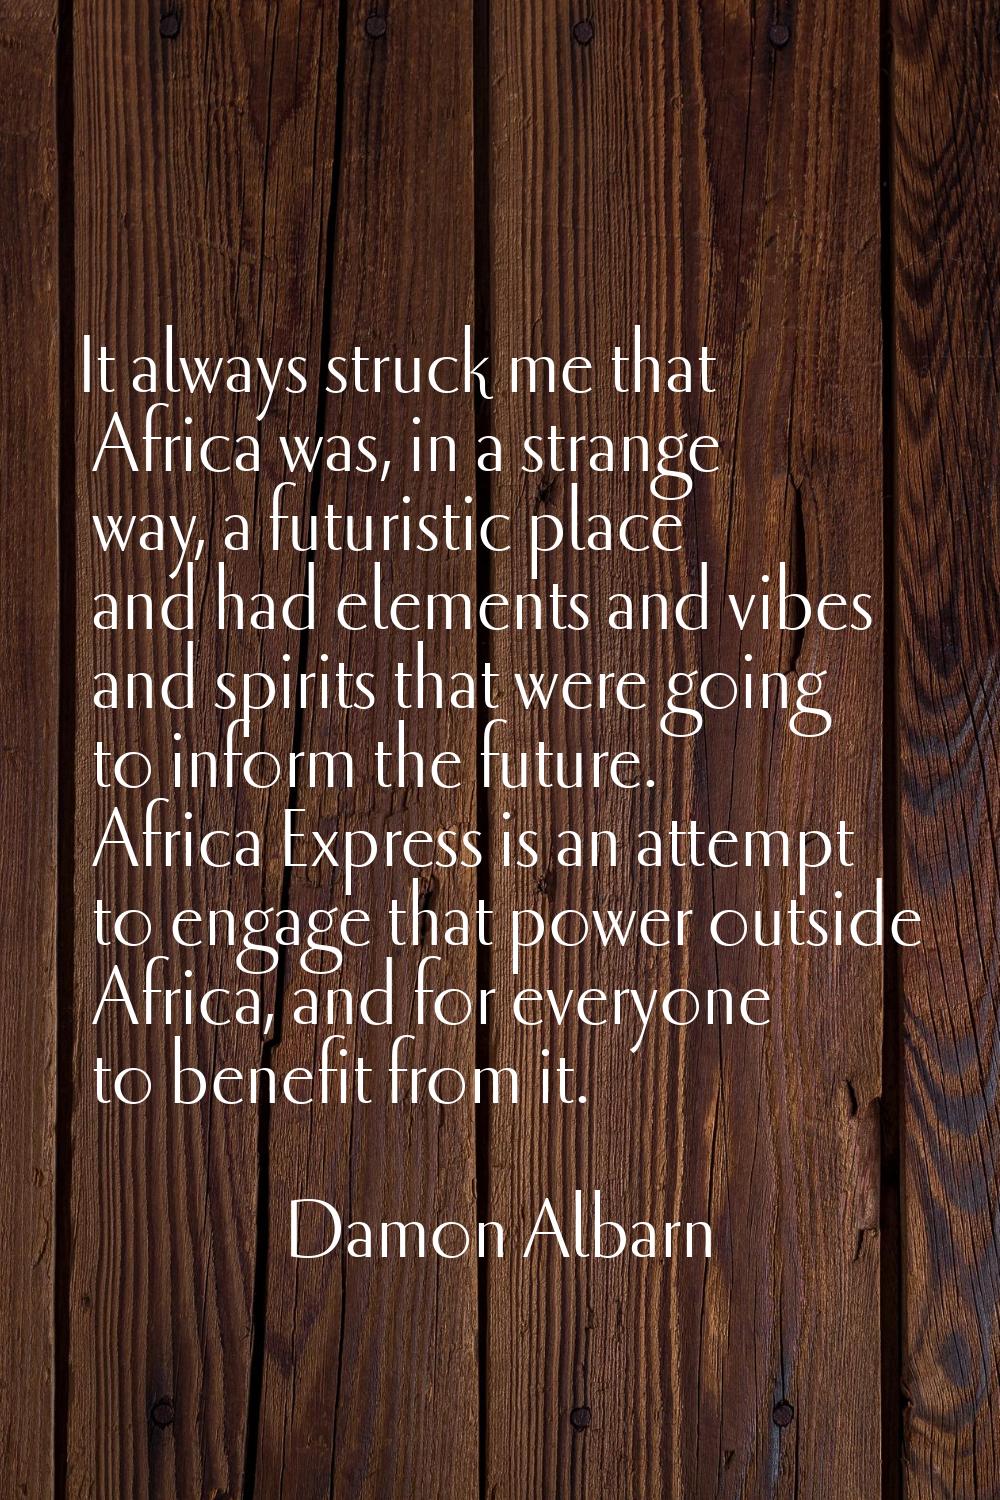 It always struck me that Africa was, in a strange way, a futuristic place and had elements and vibe